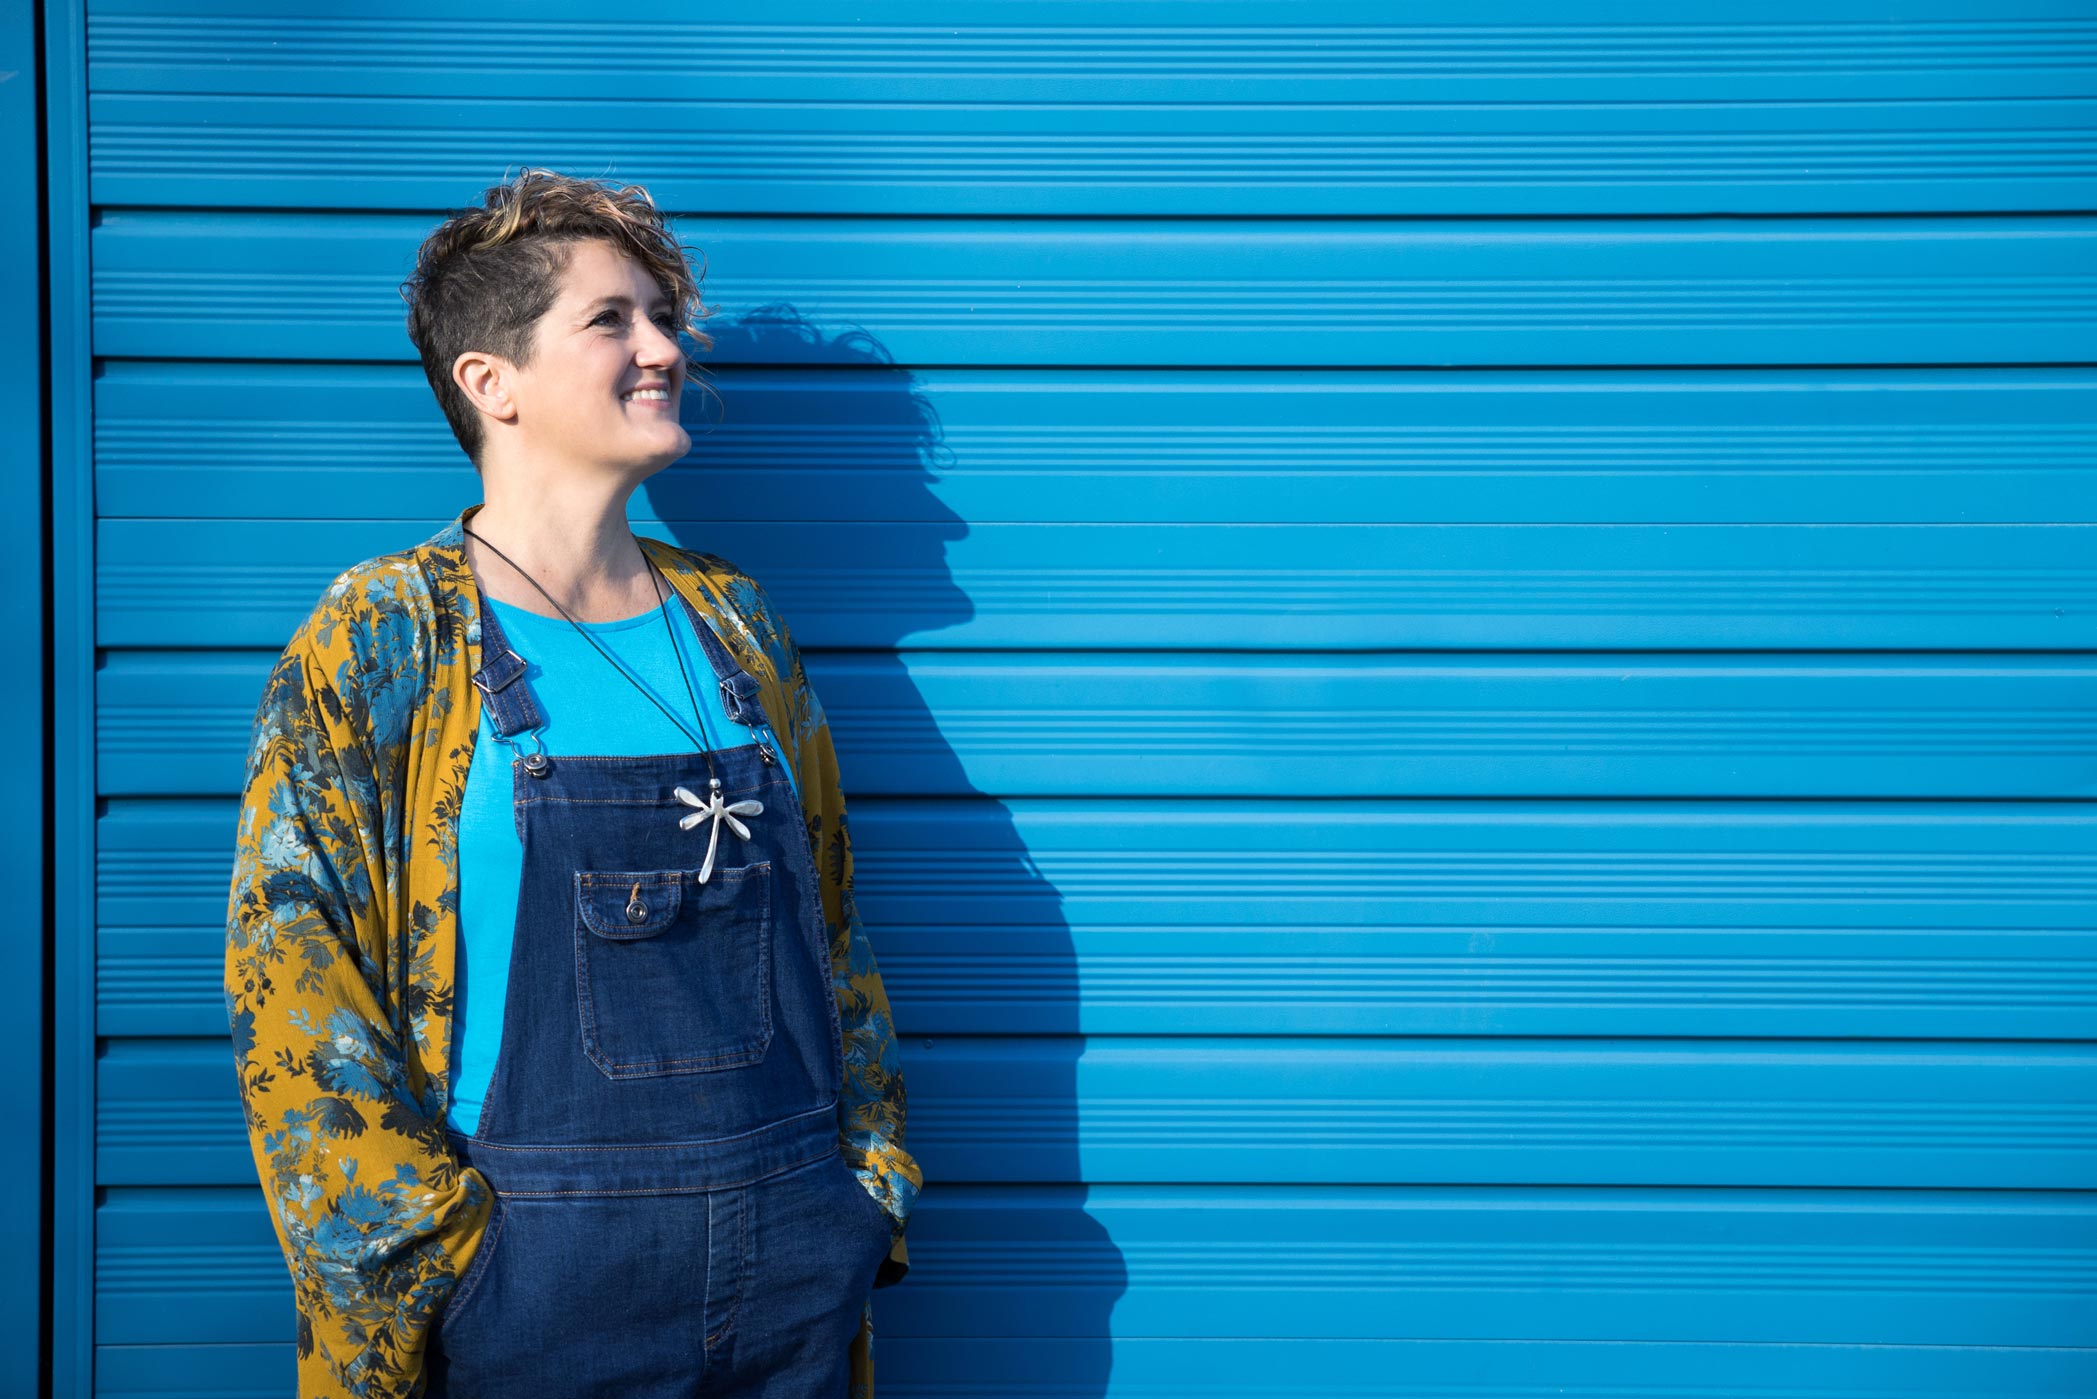 Personal branding photography in Croydon, Surrey. A woman stands in the sunshine in front of a blue wall.